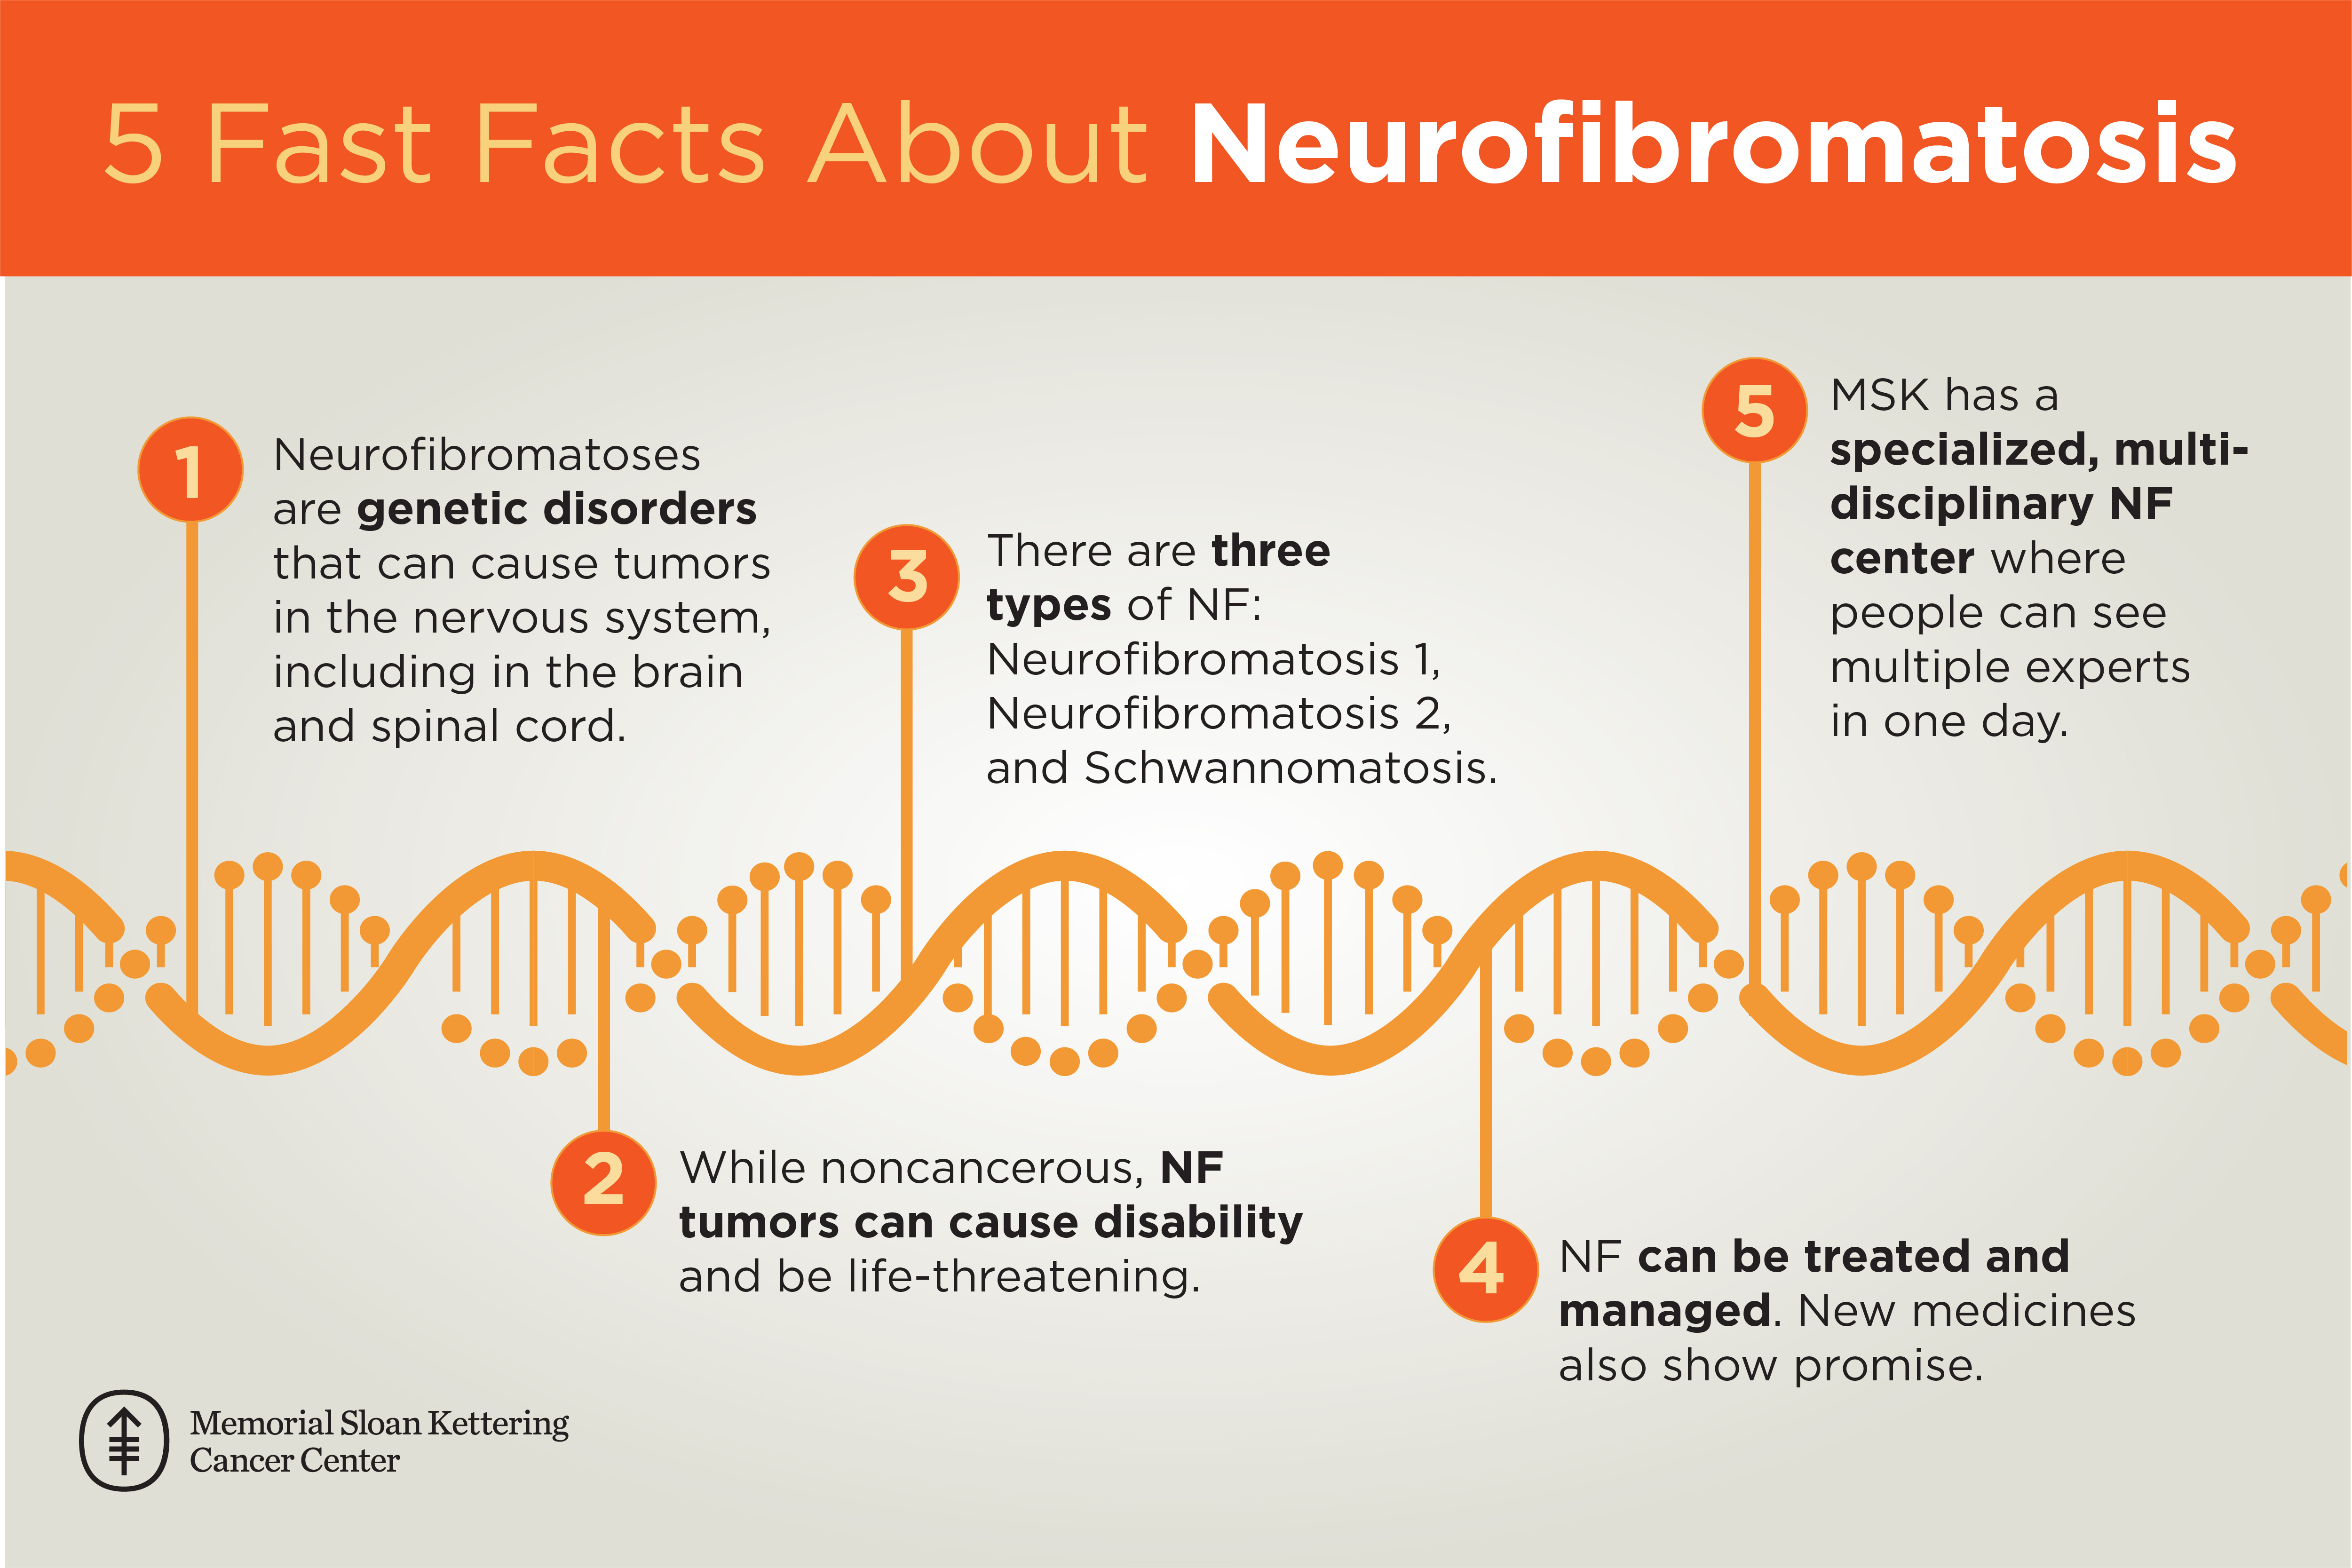 5 facts about Neurofibromatosis including the cause, types and treatment.